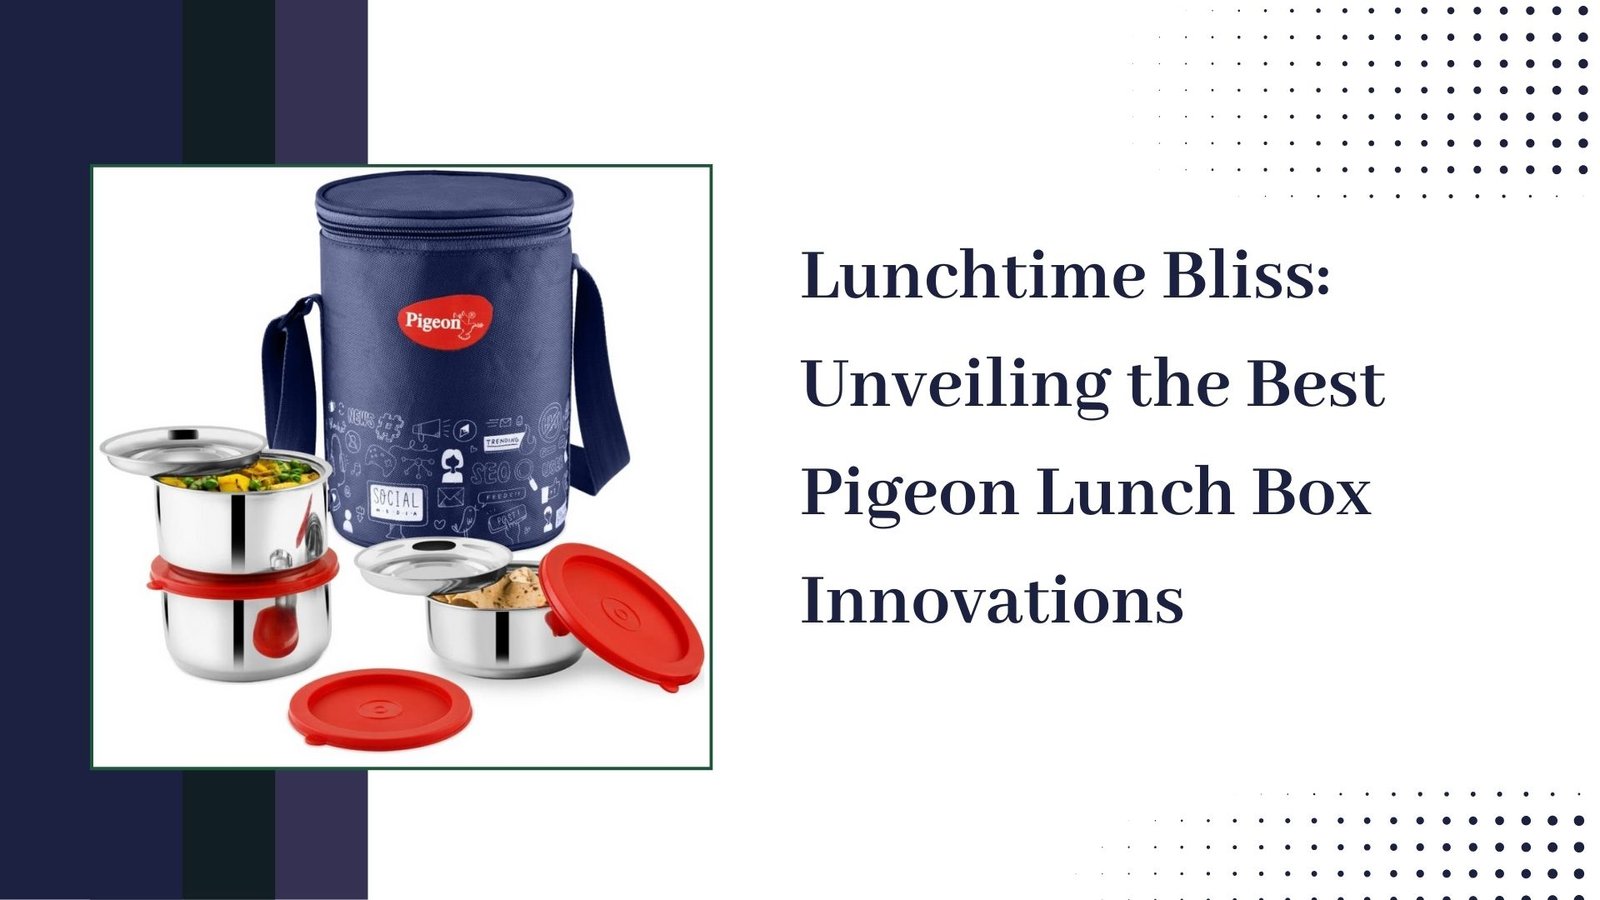 Pigeon Lunch Box